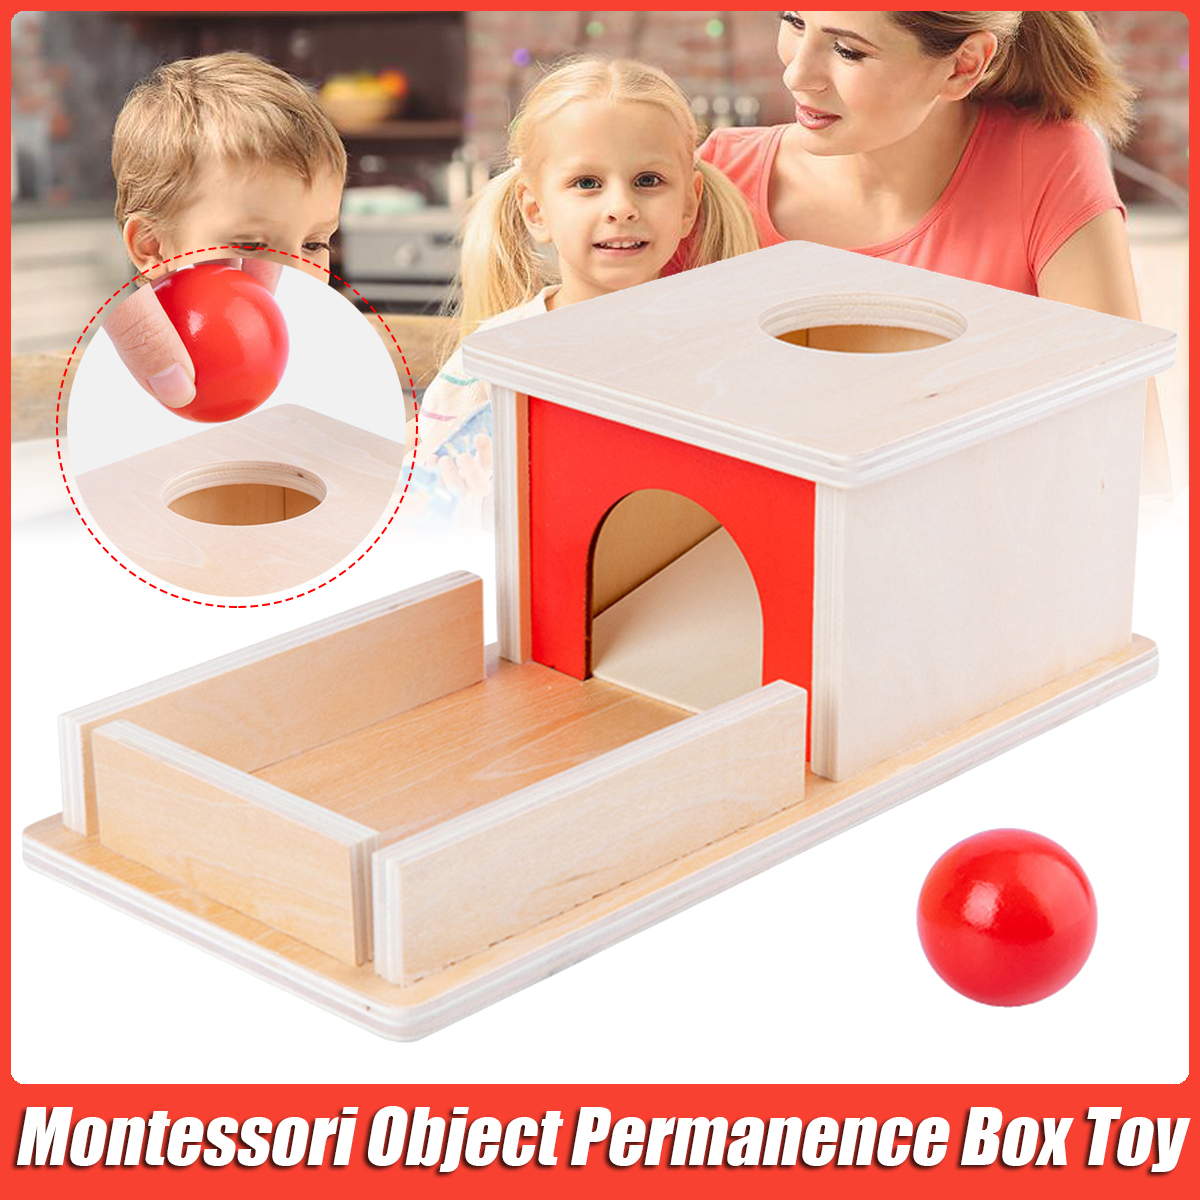 Montessori-Object-Permanence-Box-Wooden-Permanent-Box-Practical-Learning-Educational-Toy-for-Kids-Gi-1773227-2